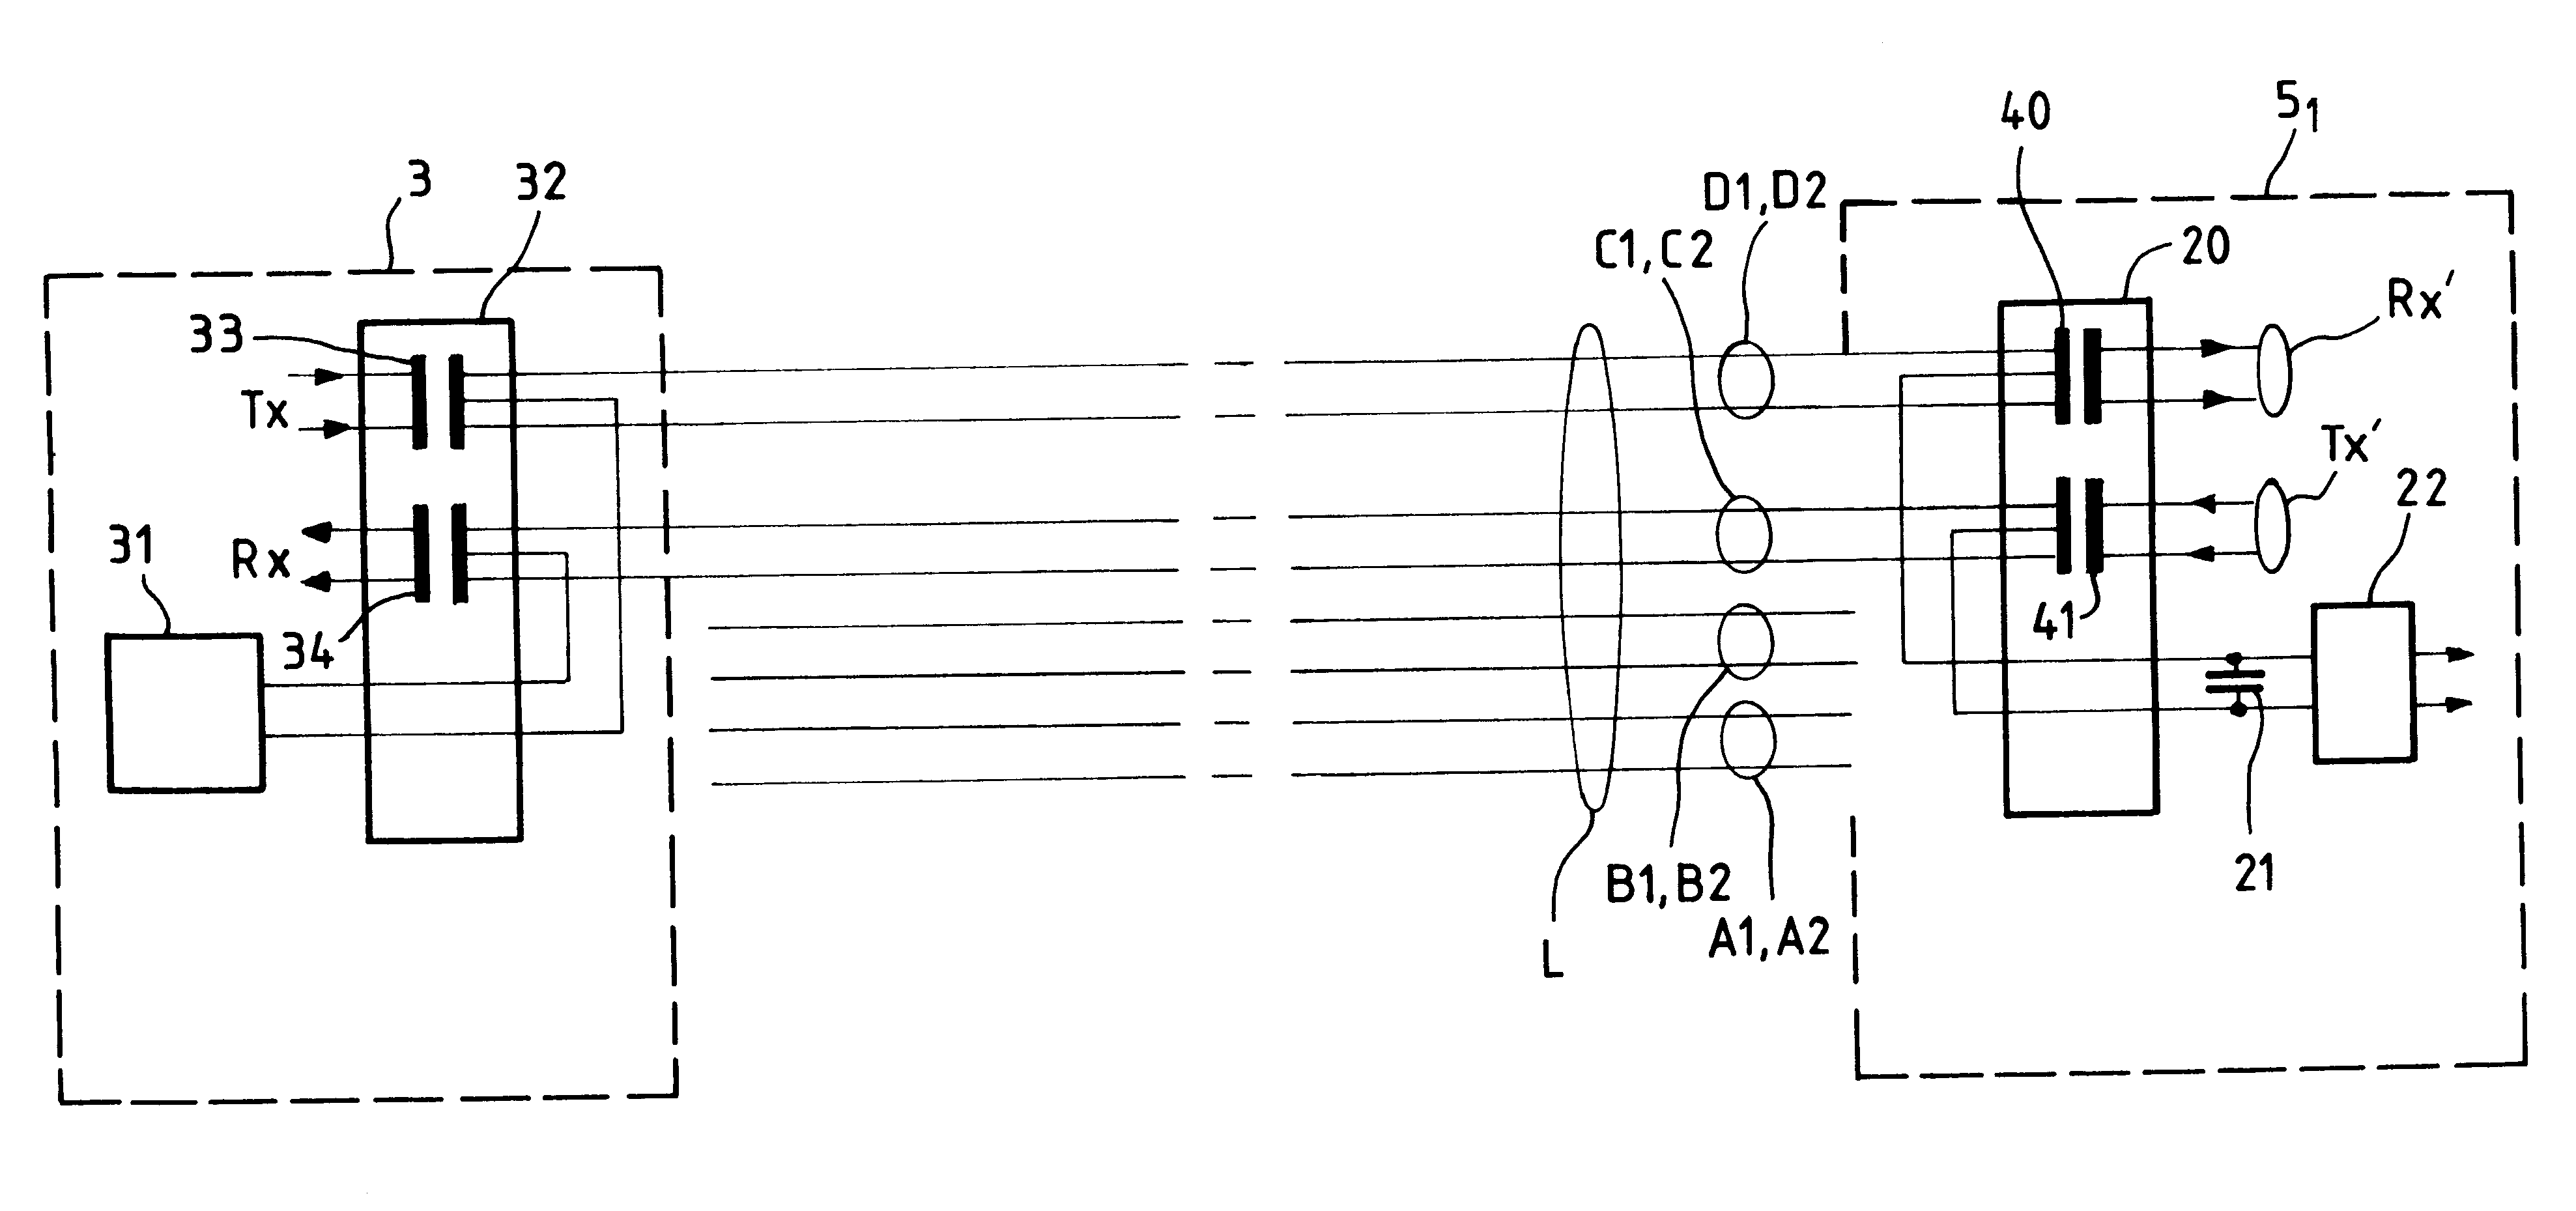 Method of providing a remote power feed to a terminal in a local area network, and corresponding remote power feed unit, concentrator, repeator, and terminal